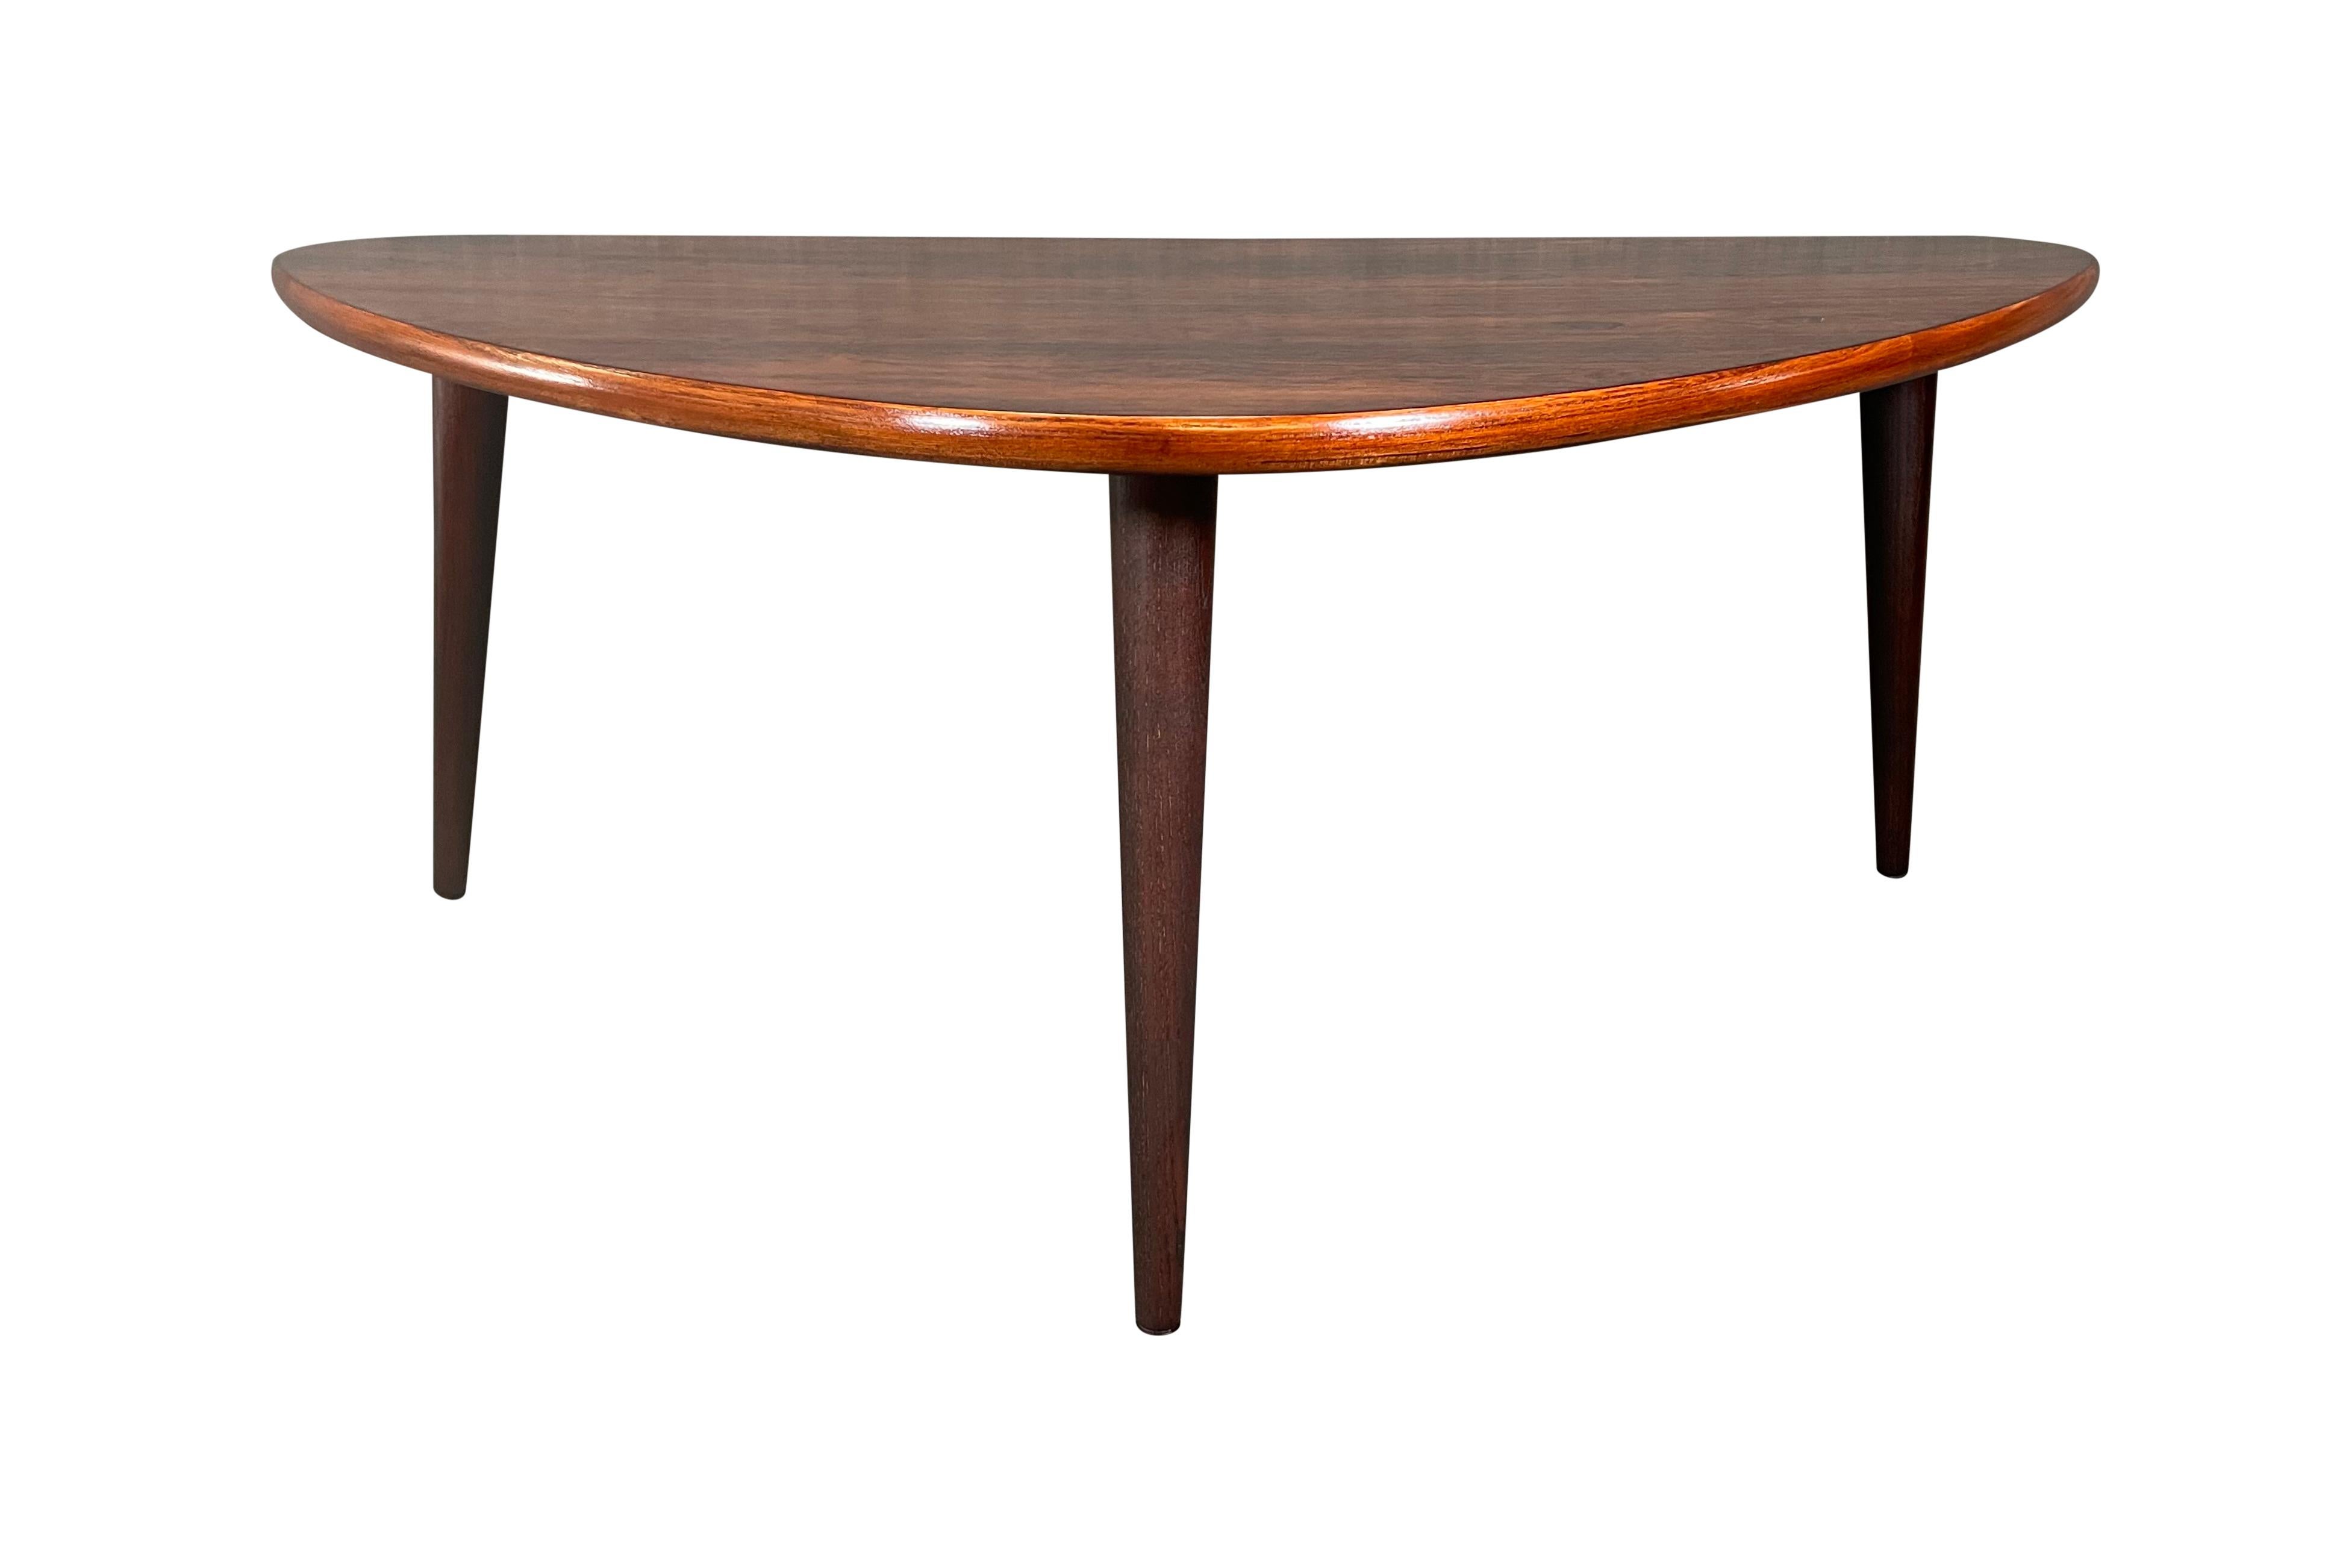 Here is a beautiful scandinavian modern coffee table in rosewood manufactured in Denmark in the 1960's.
This lovely table, recently imported from Europe to California before its refinishing, features a vibrant wood grain on its top and three